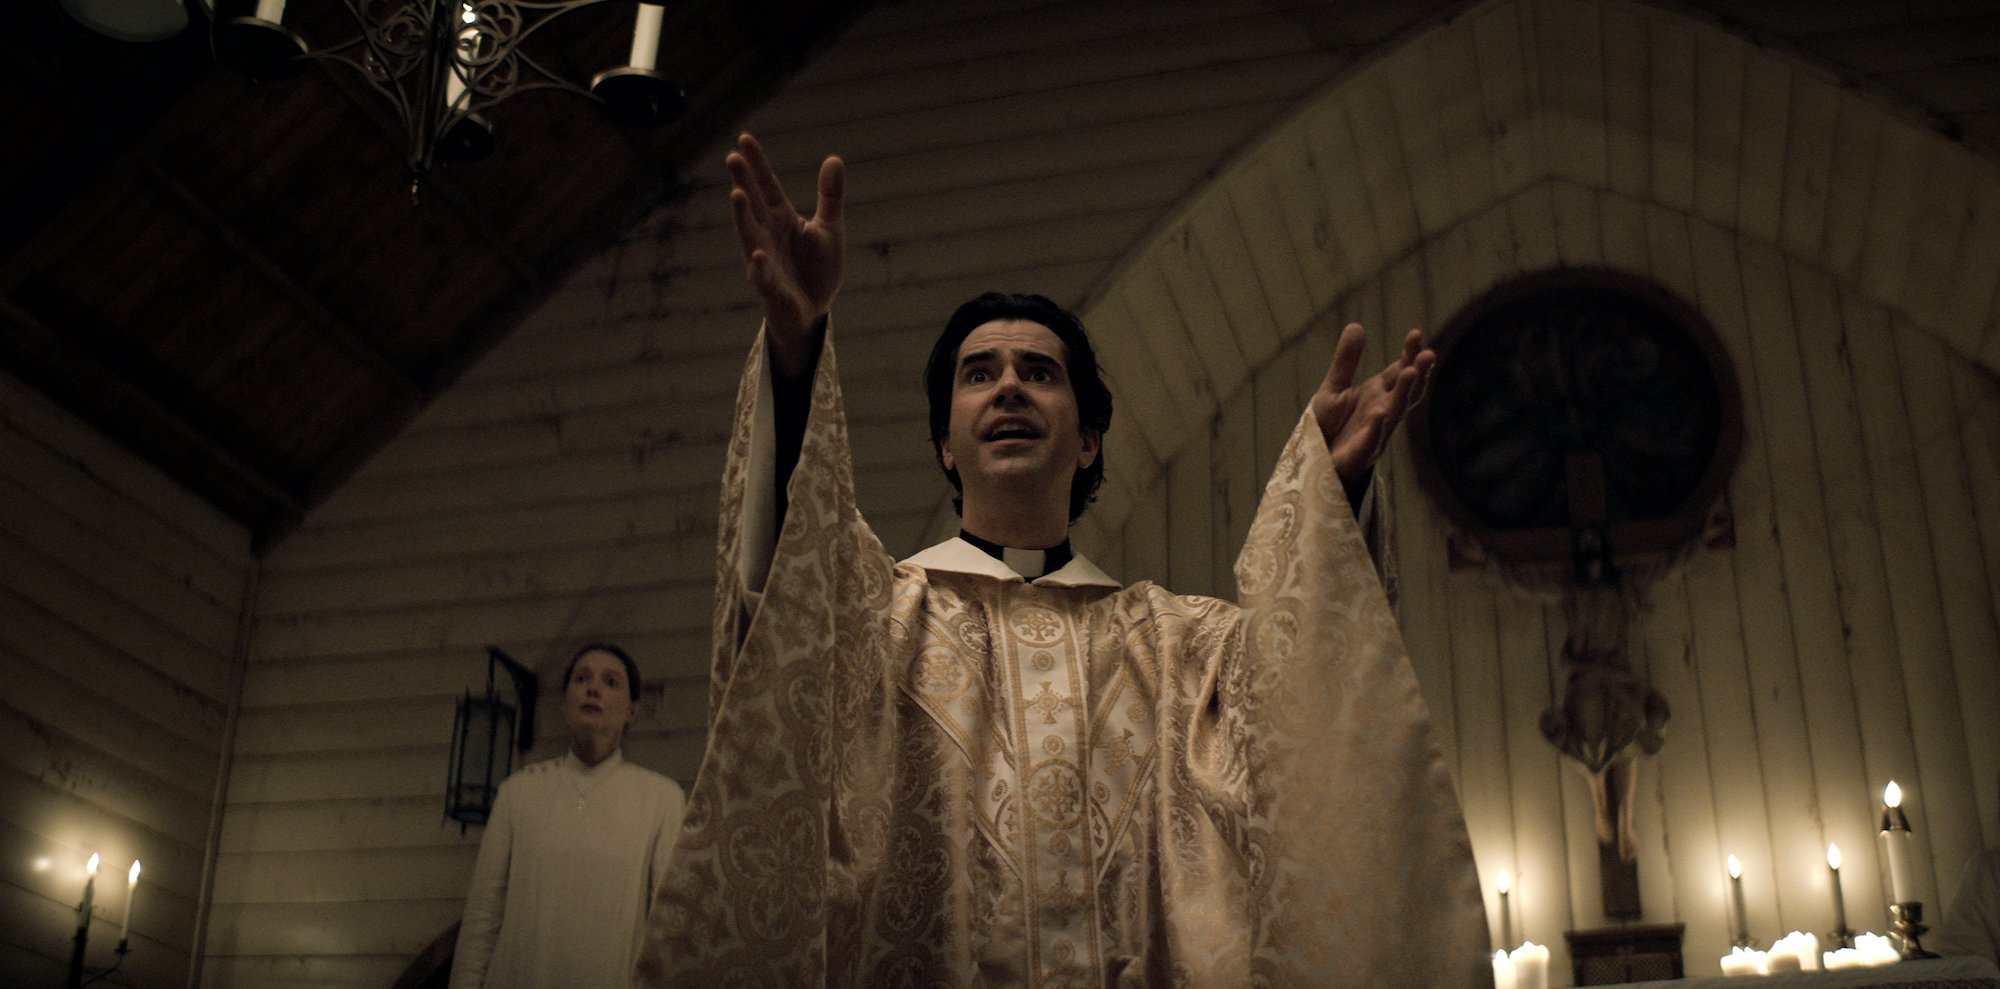 Samantha Sloyan as Bev Keane, with Hamish Linklater in 'Midnight Mass' as Father Paul with his hands in prayer walking down the aisle in the Crockett Island Church